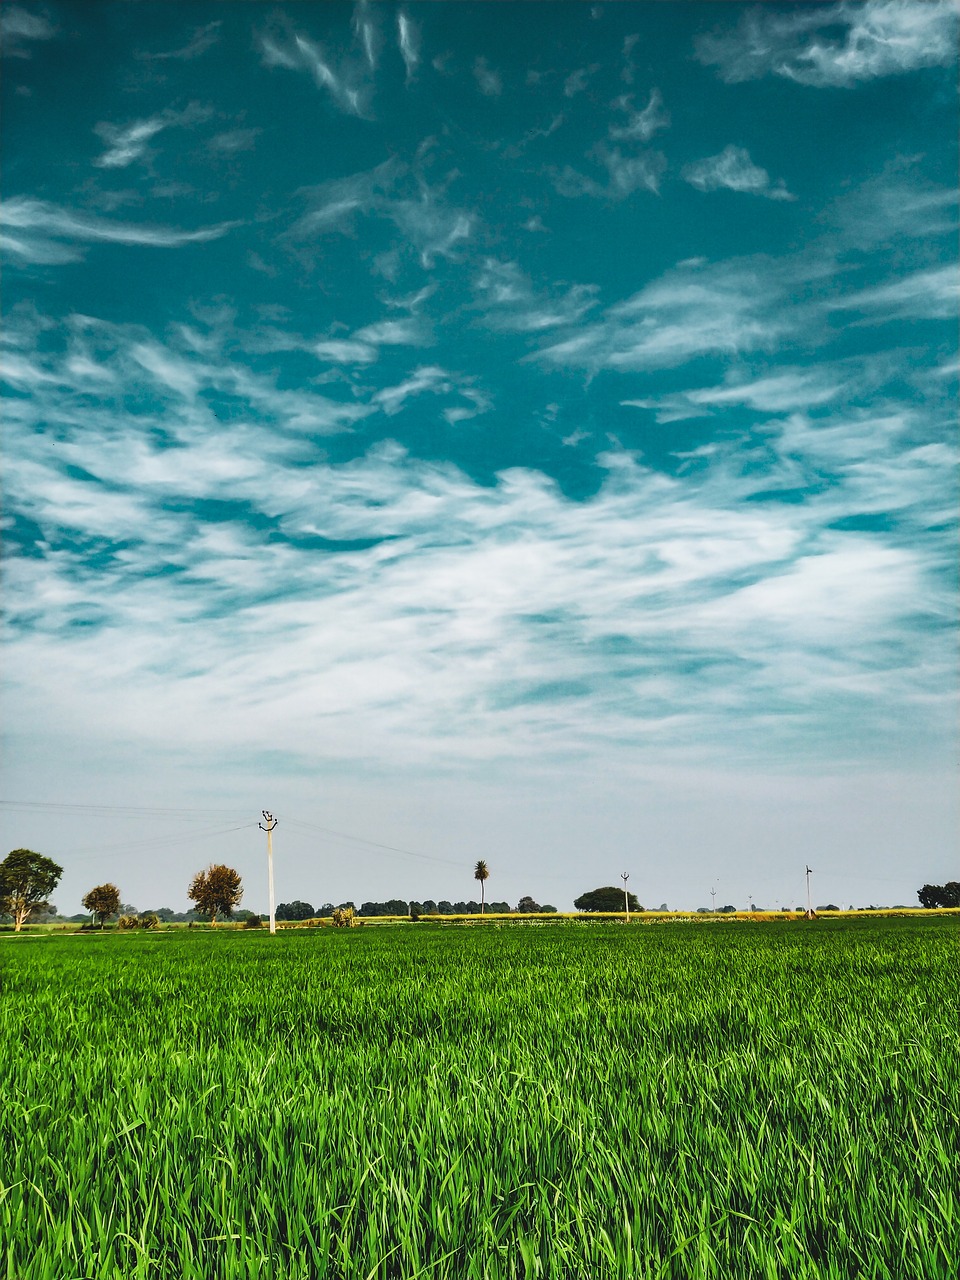 Scenic, clouds, blue sky, hd wallpaper, field - free image from ...